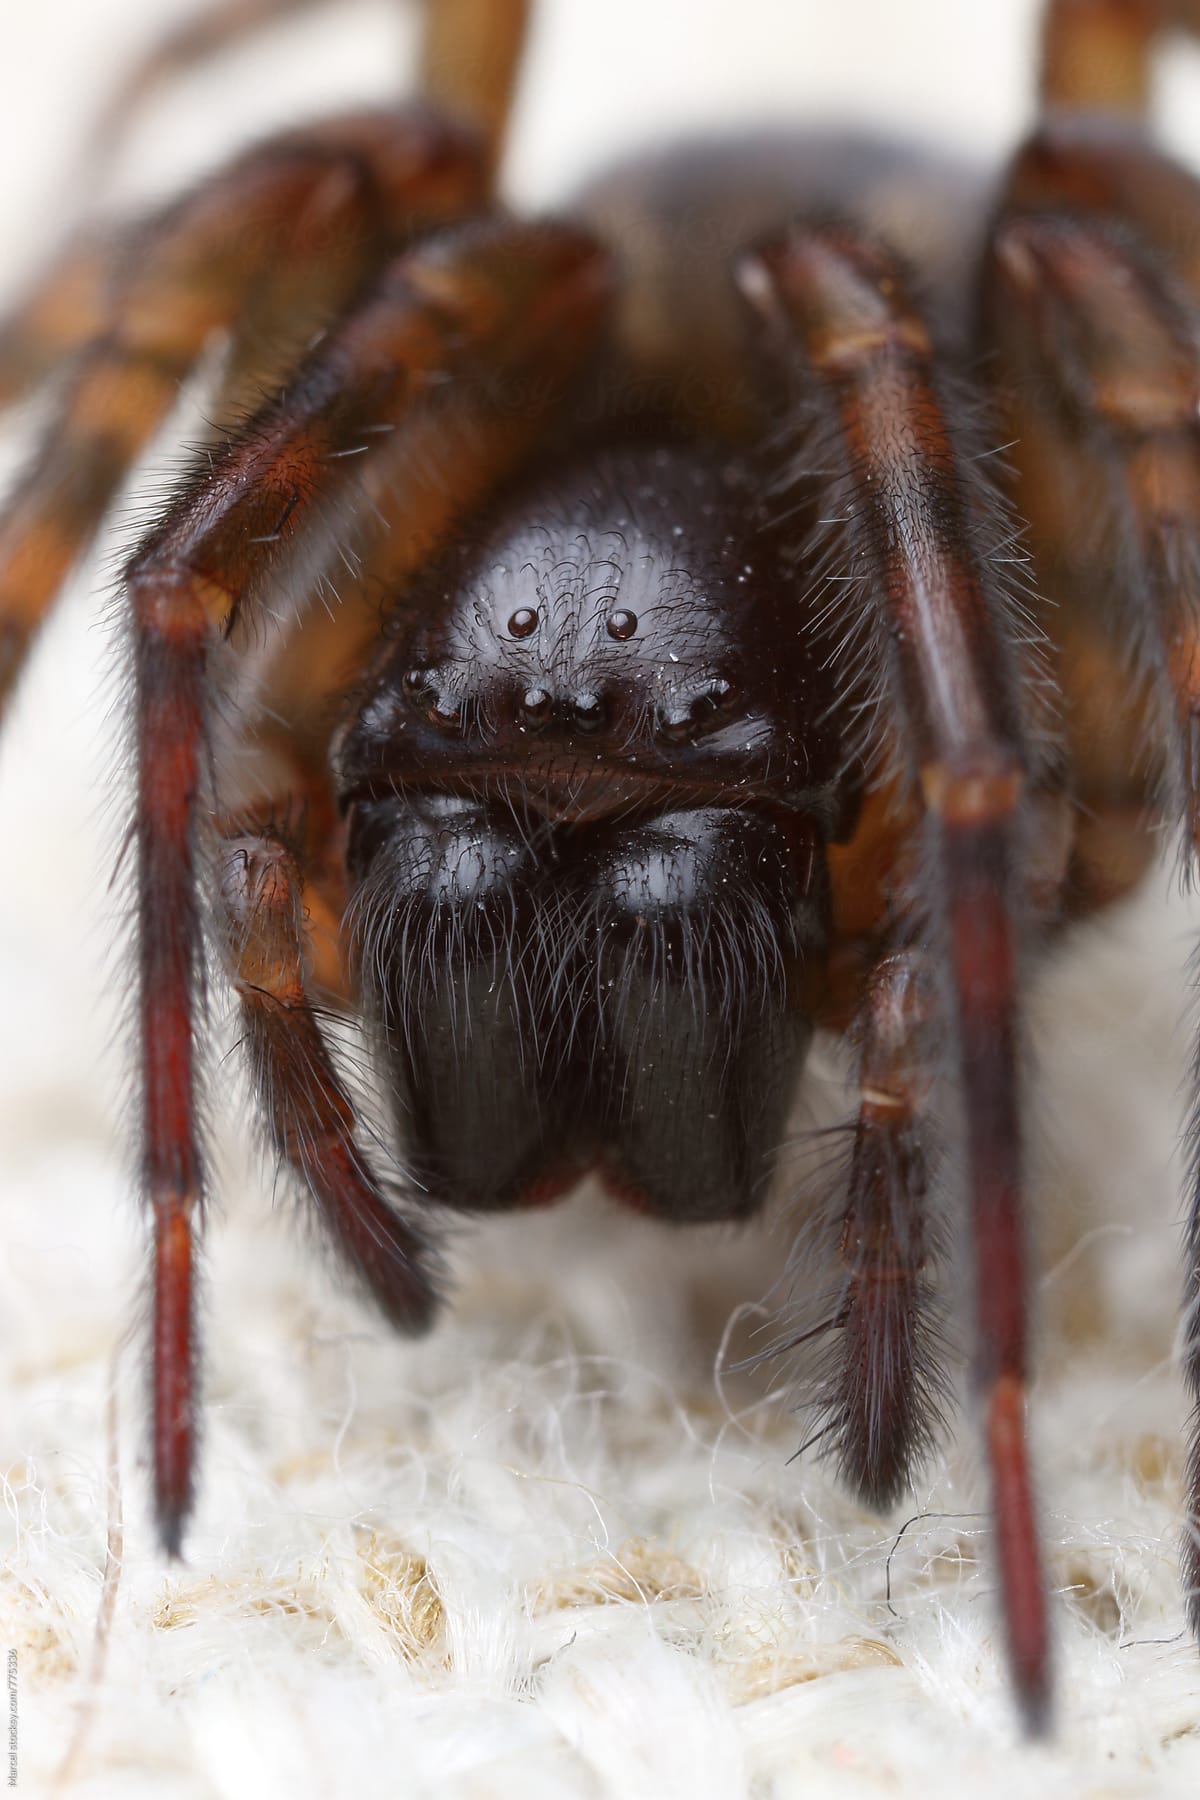 Scary hairy spider on a cushion